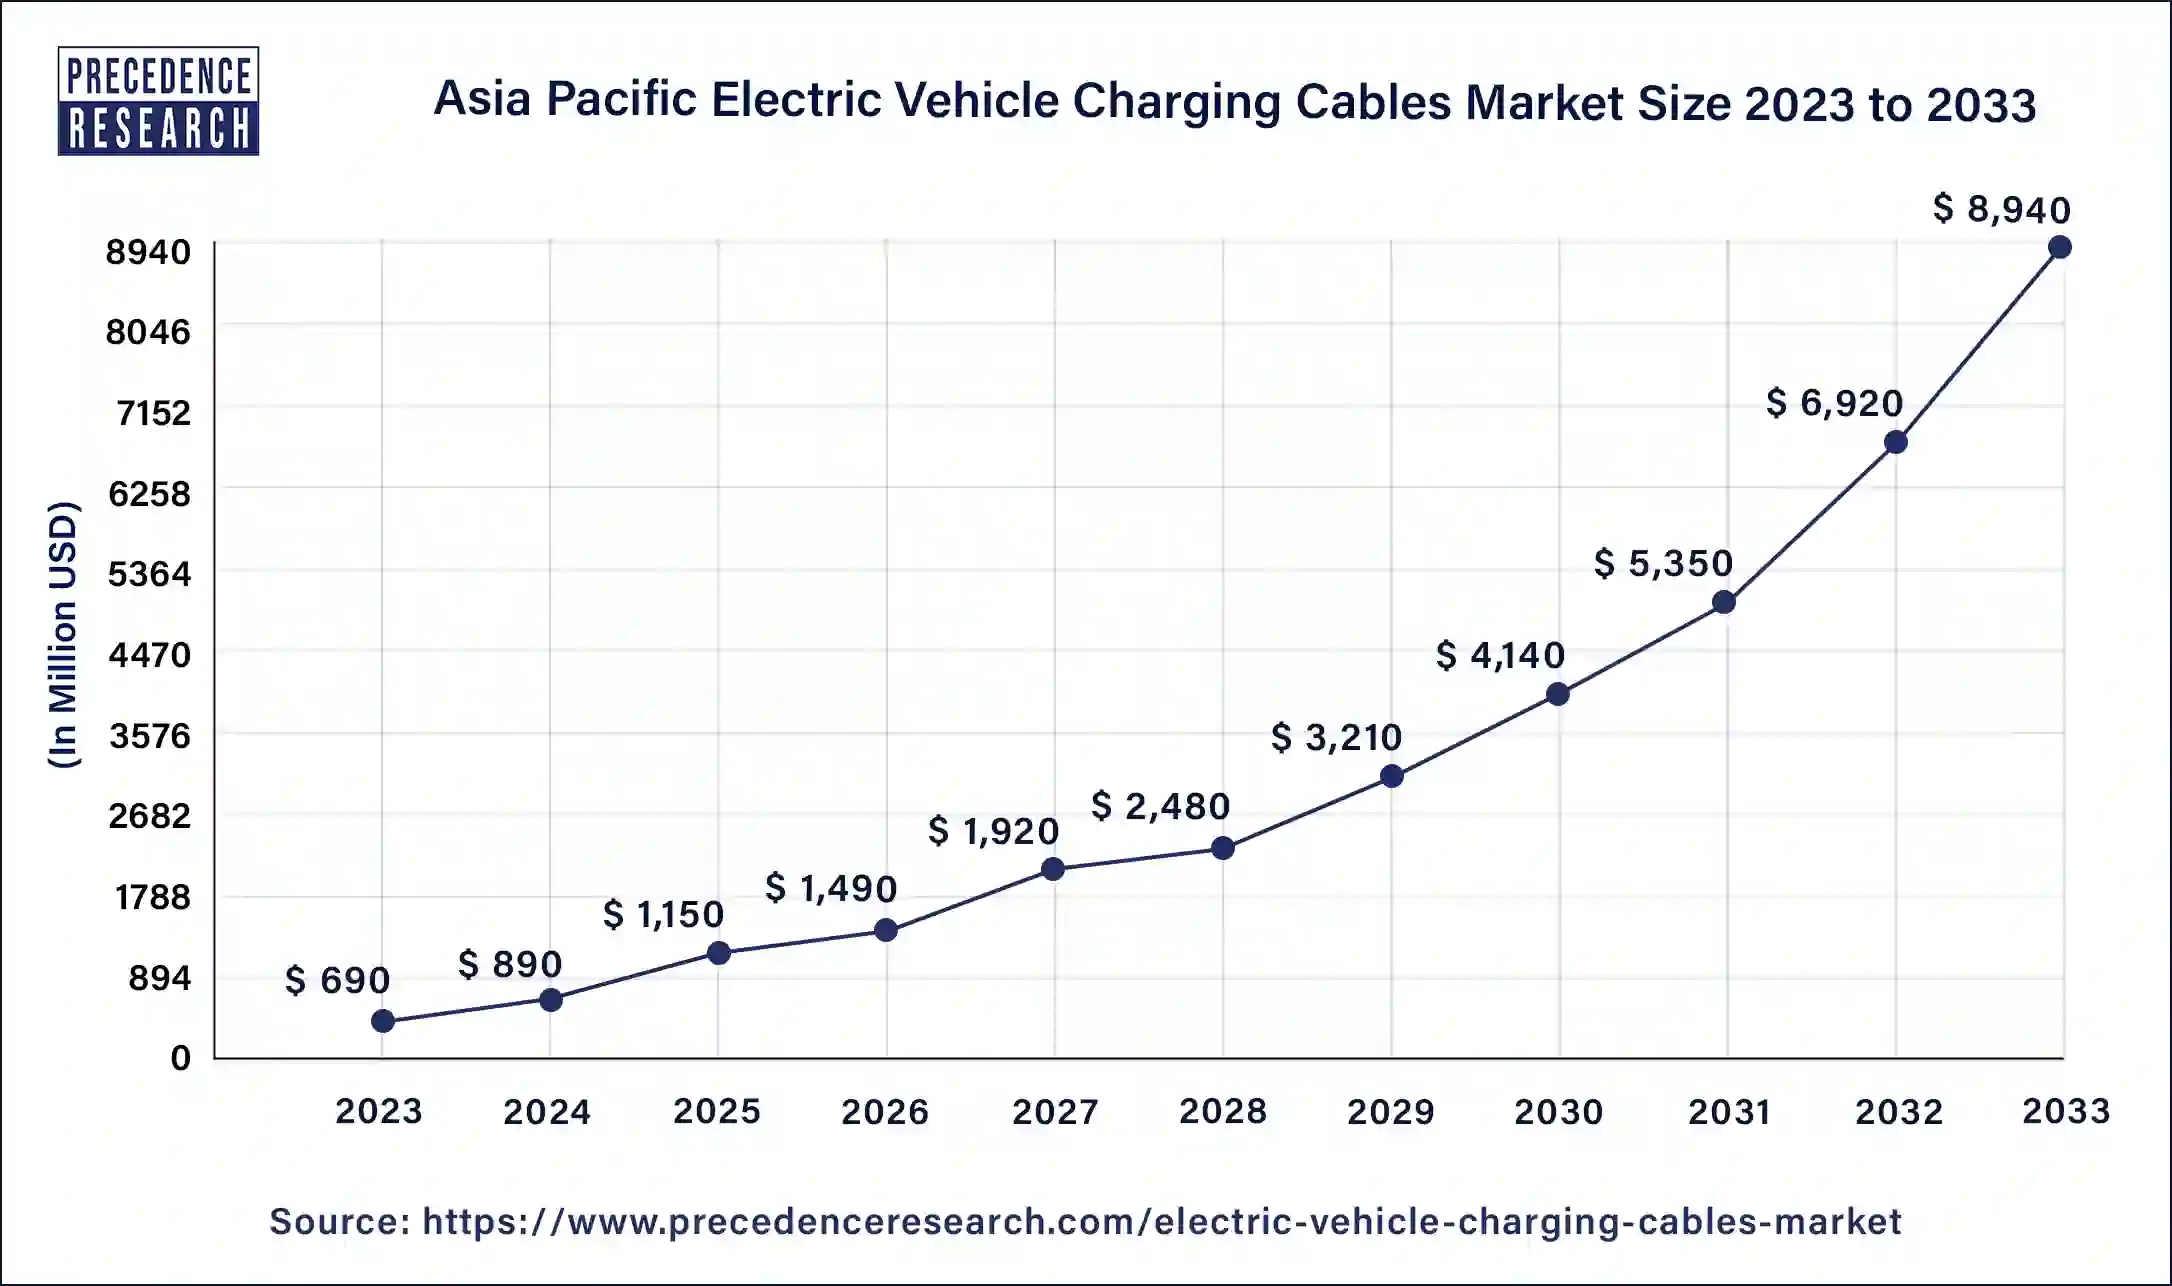 Asia Pacific Electric Vehicle Charging Cables Market Size 2024 to 2033